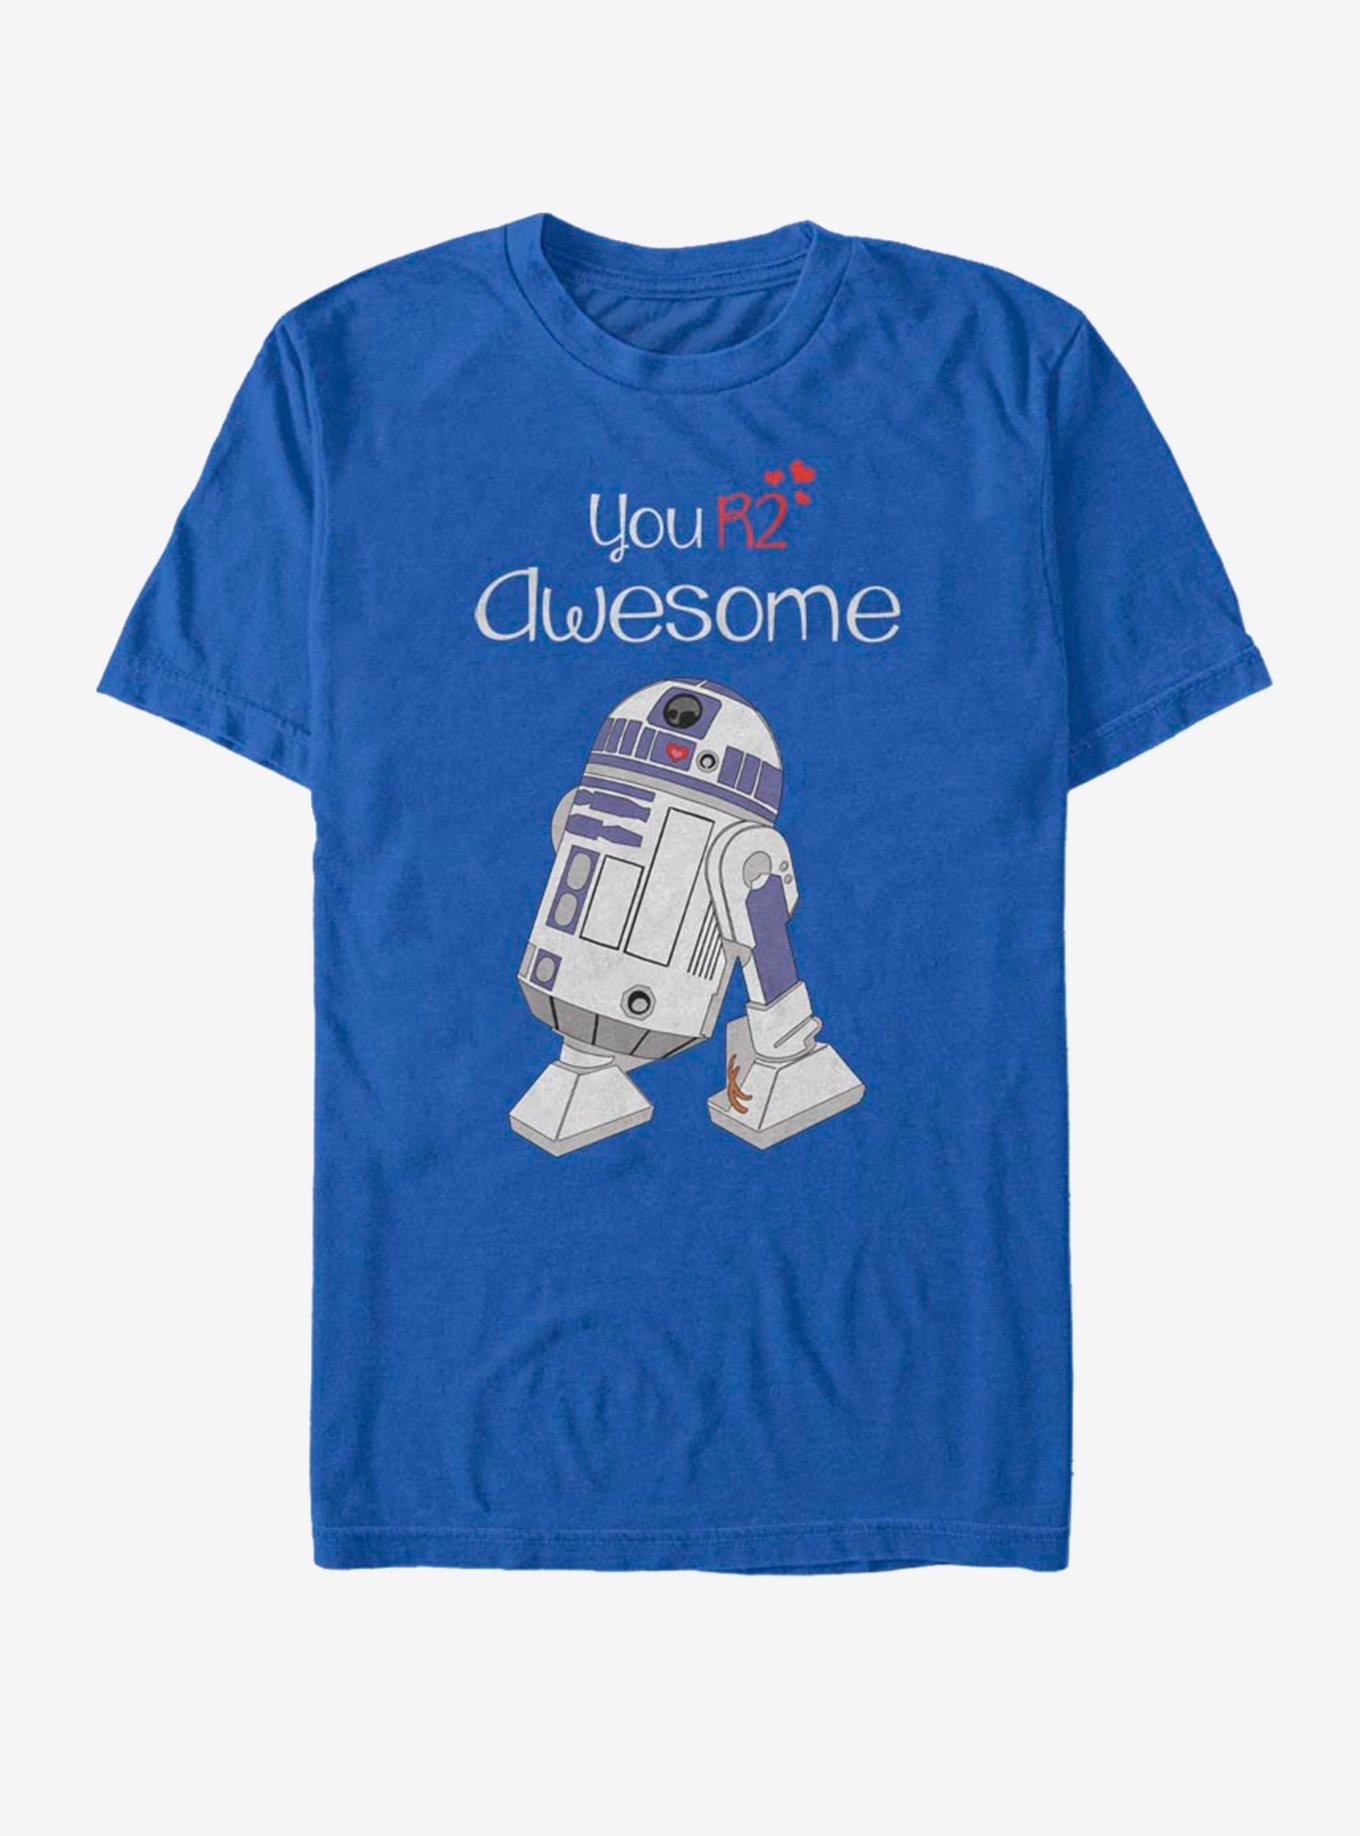 Star Wars You R2 Aswesome T-Shirt, , hi-res